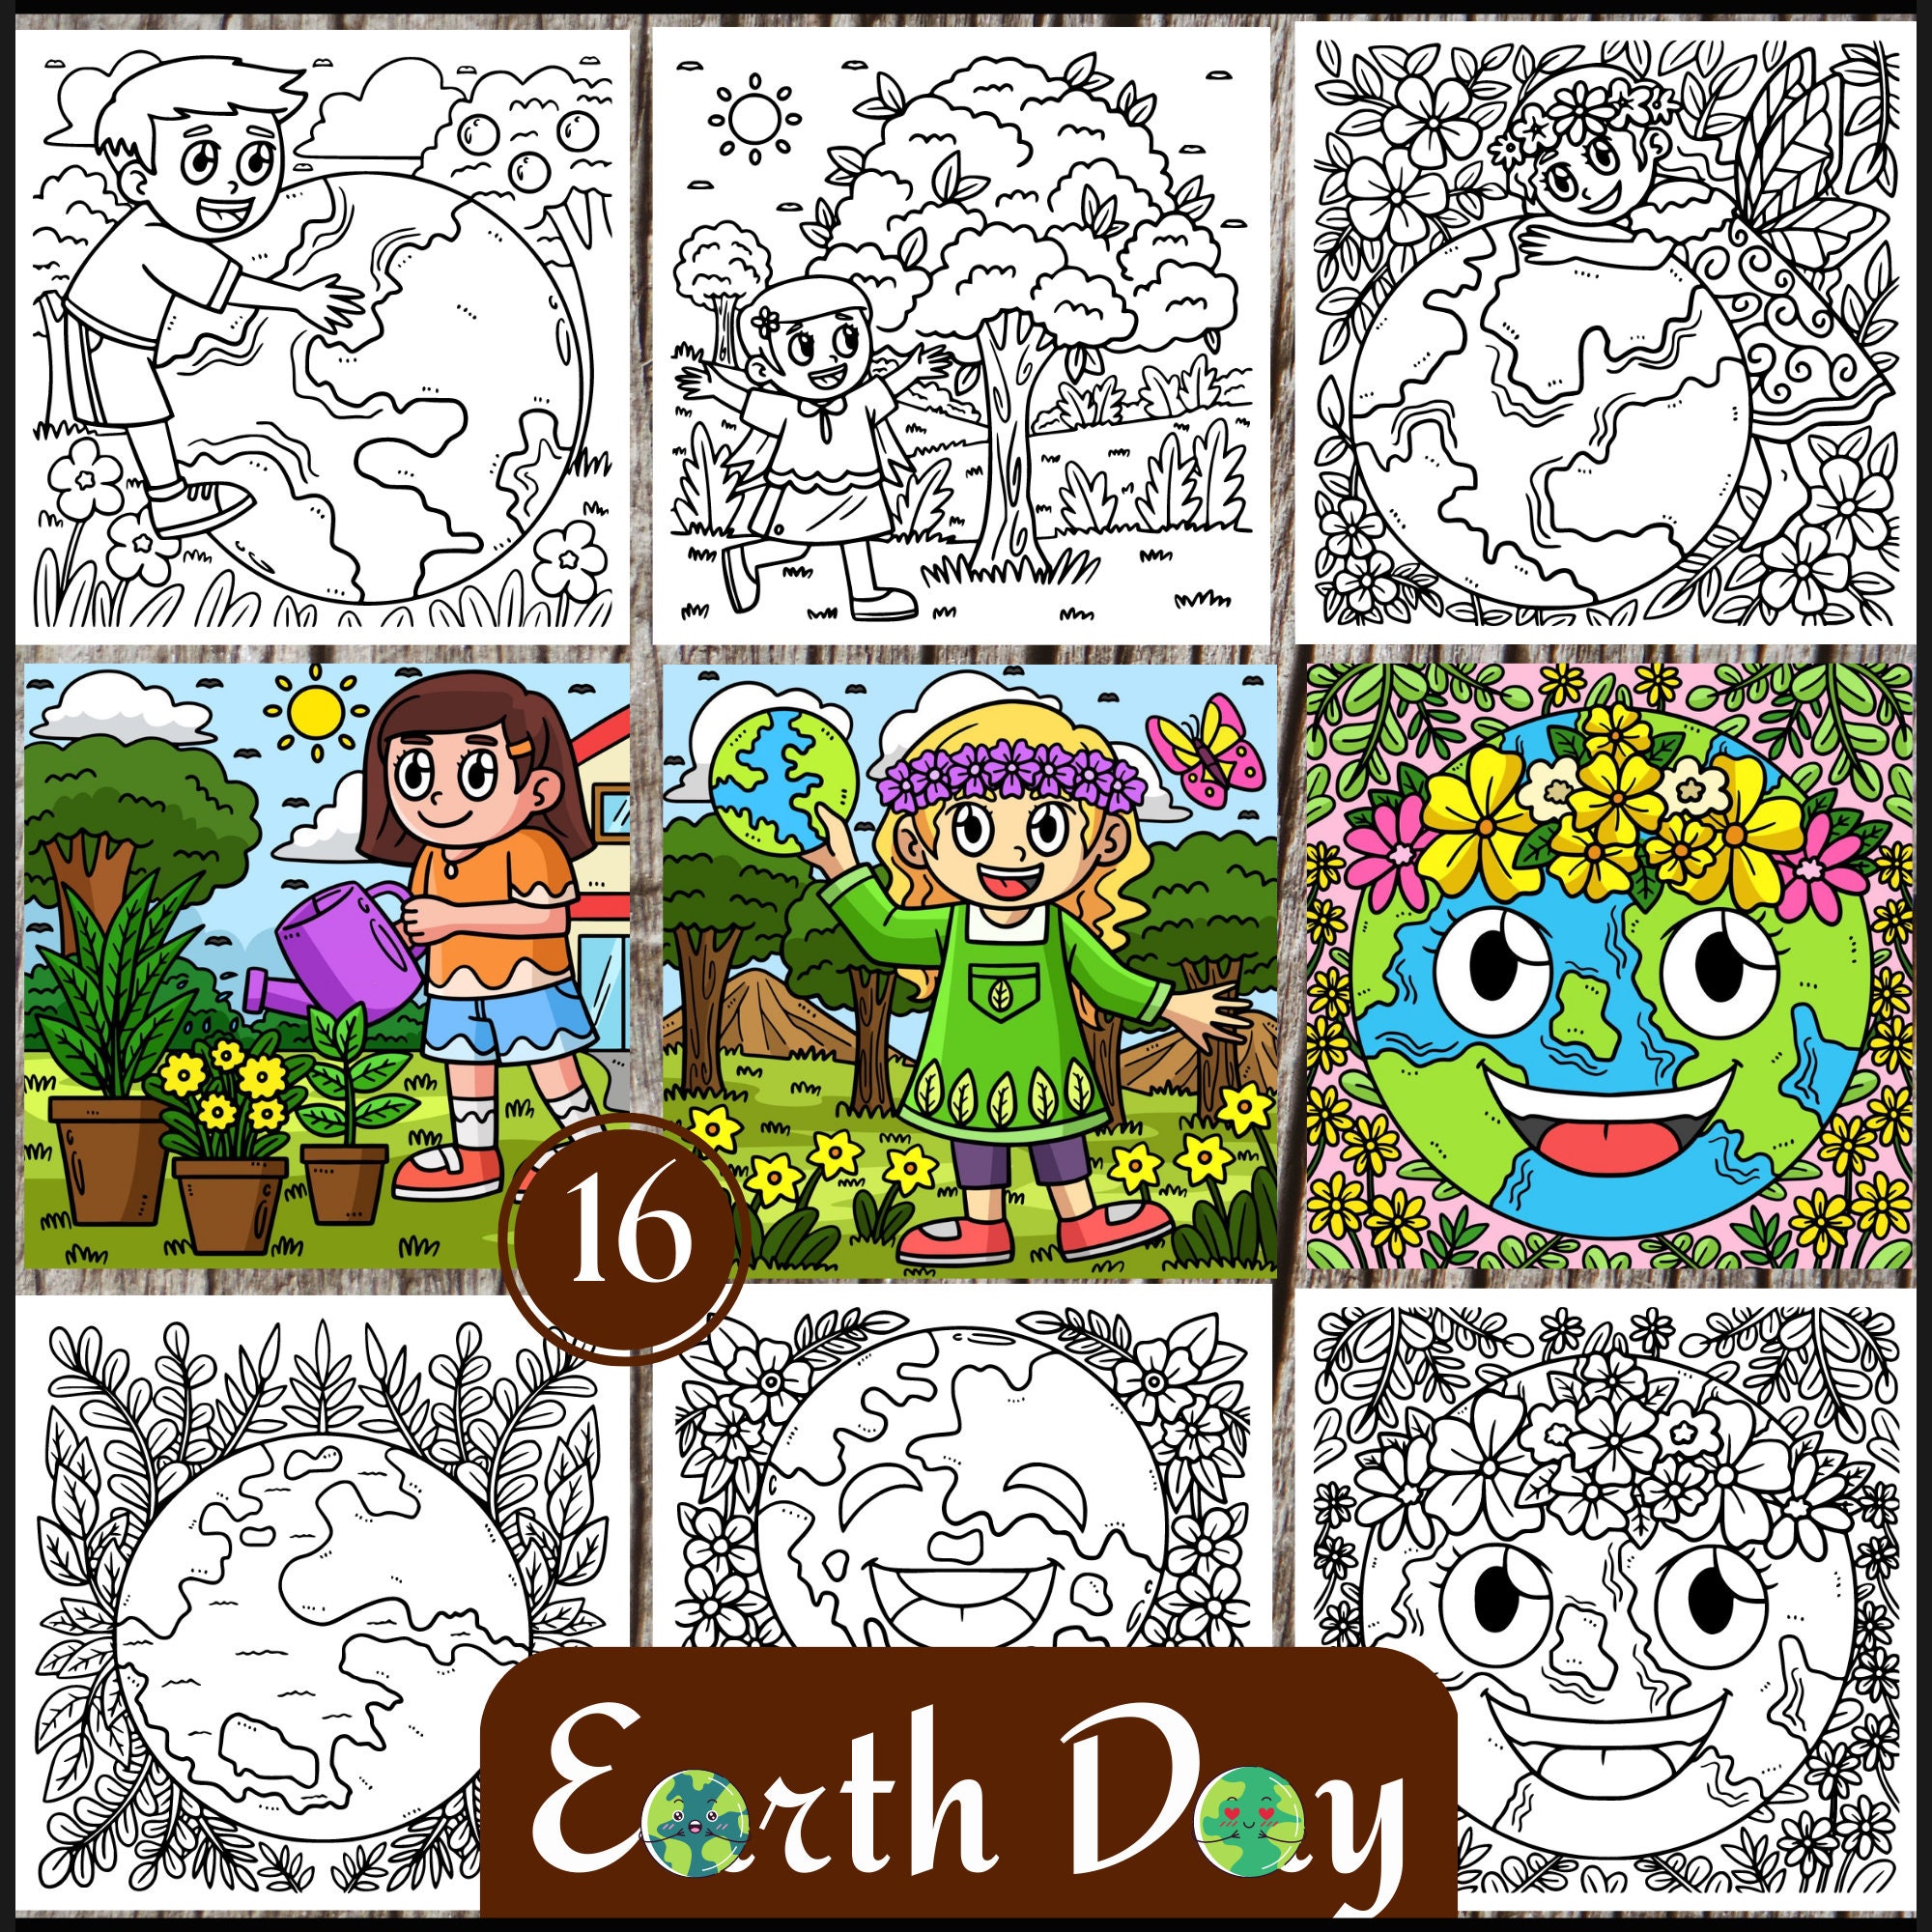 how to make earth day poster drawing for kids - YouTube